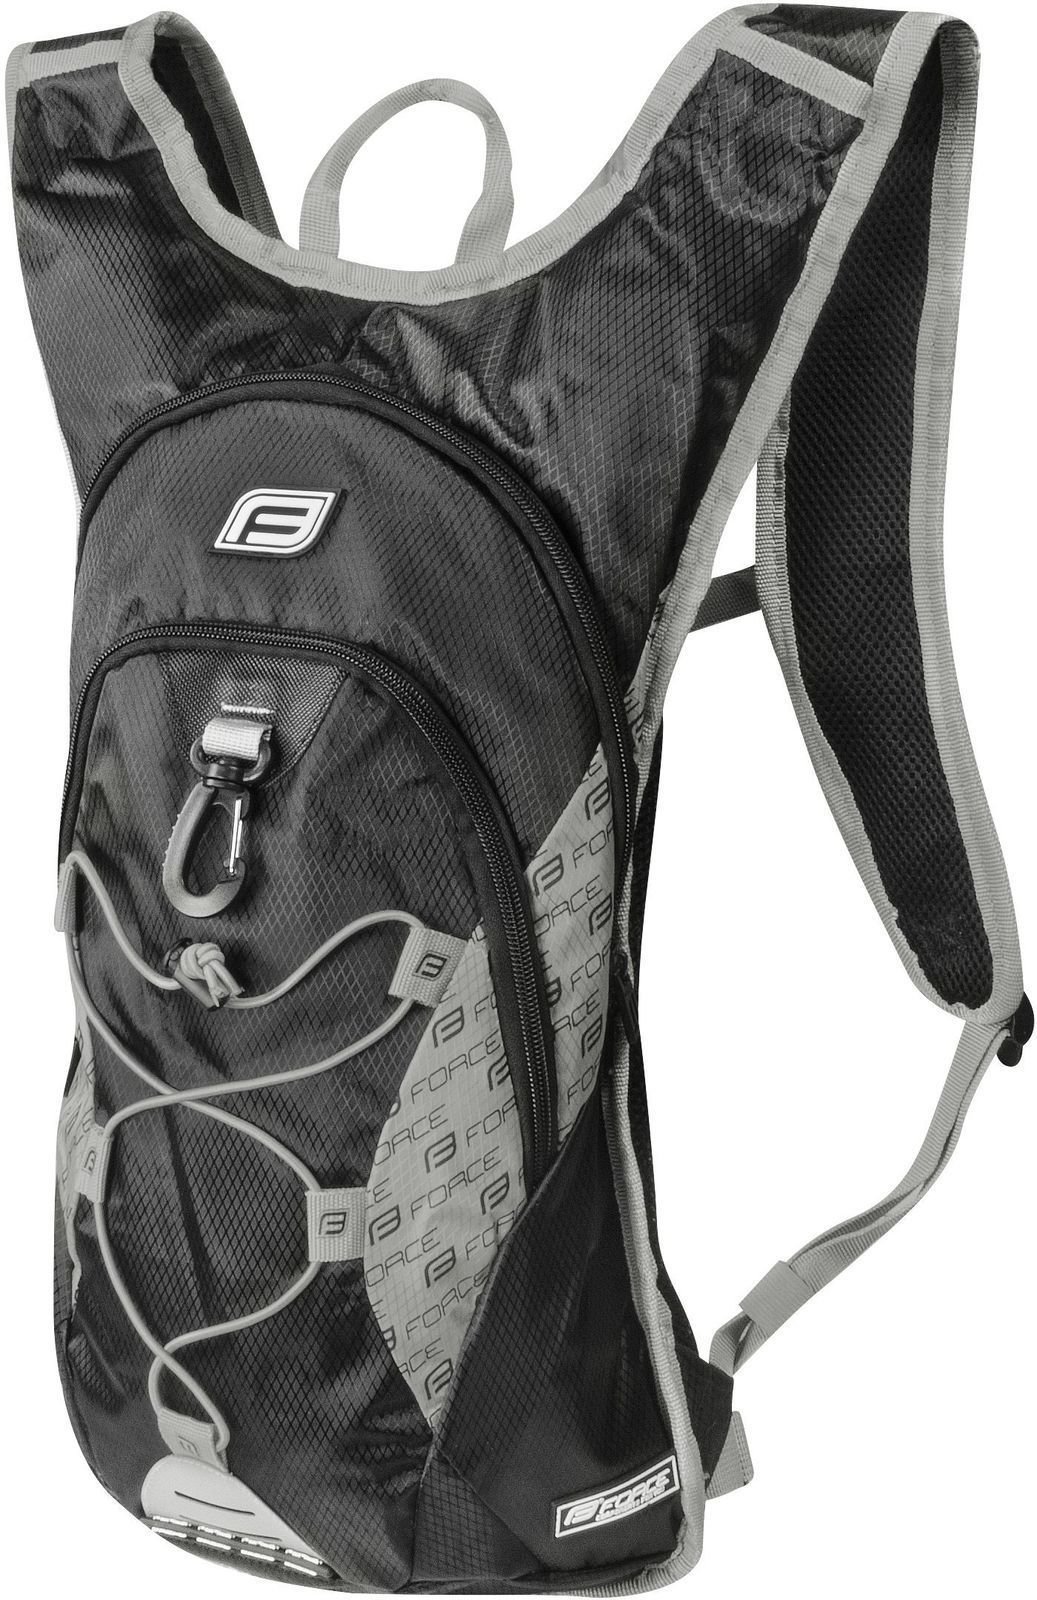 Mochila para exteriores Force Berry Backpack 12 Negro-Grey Mochila para exteriores